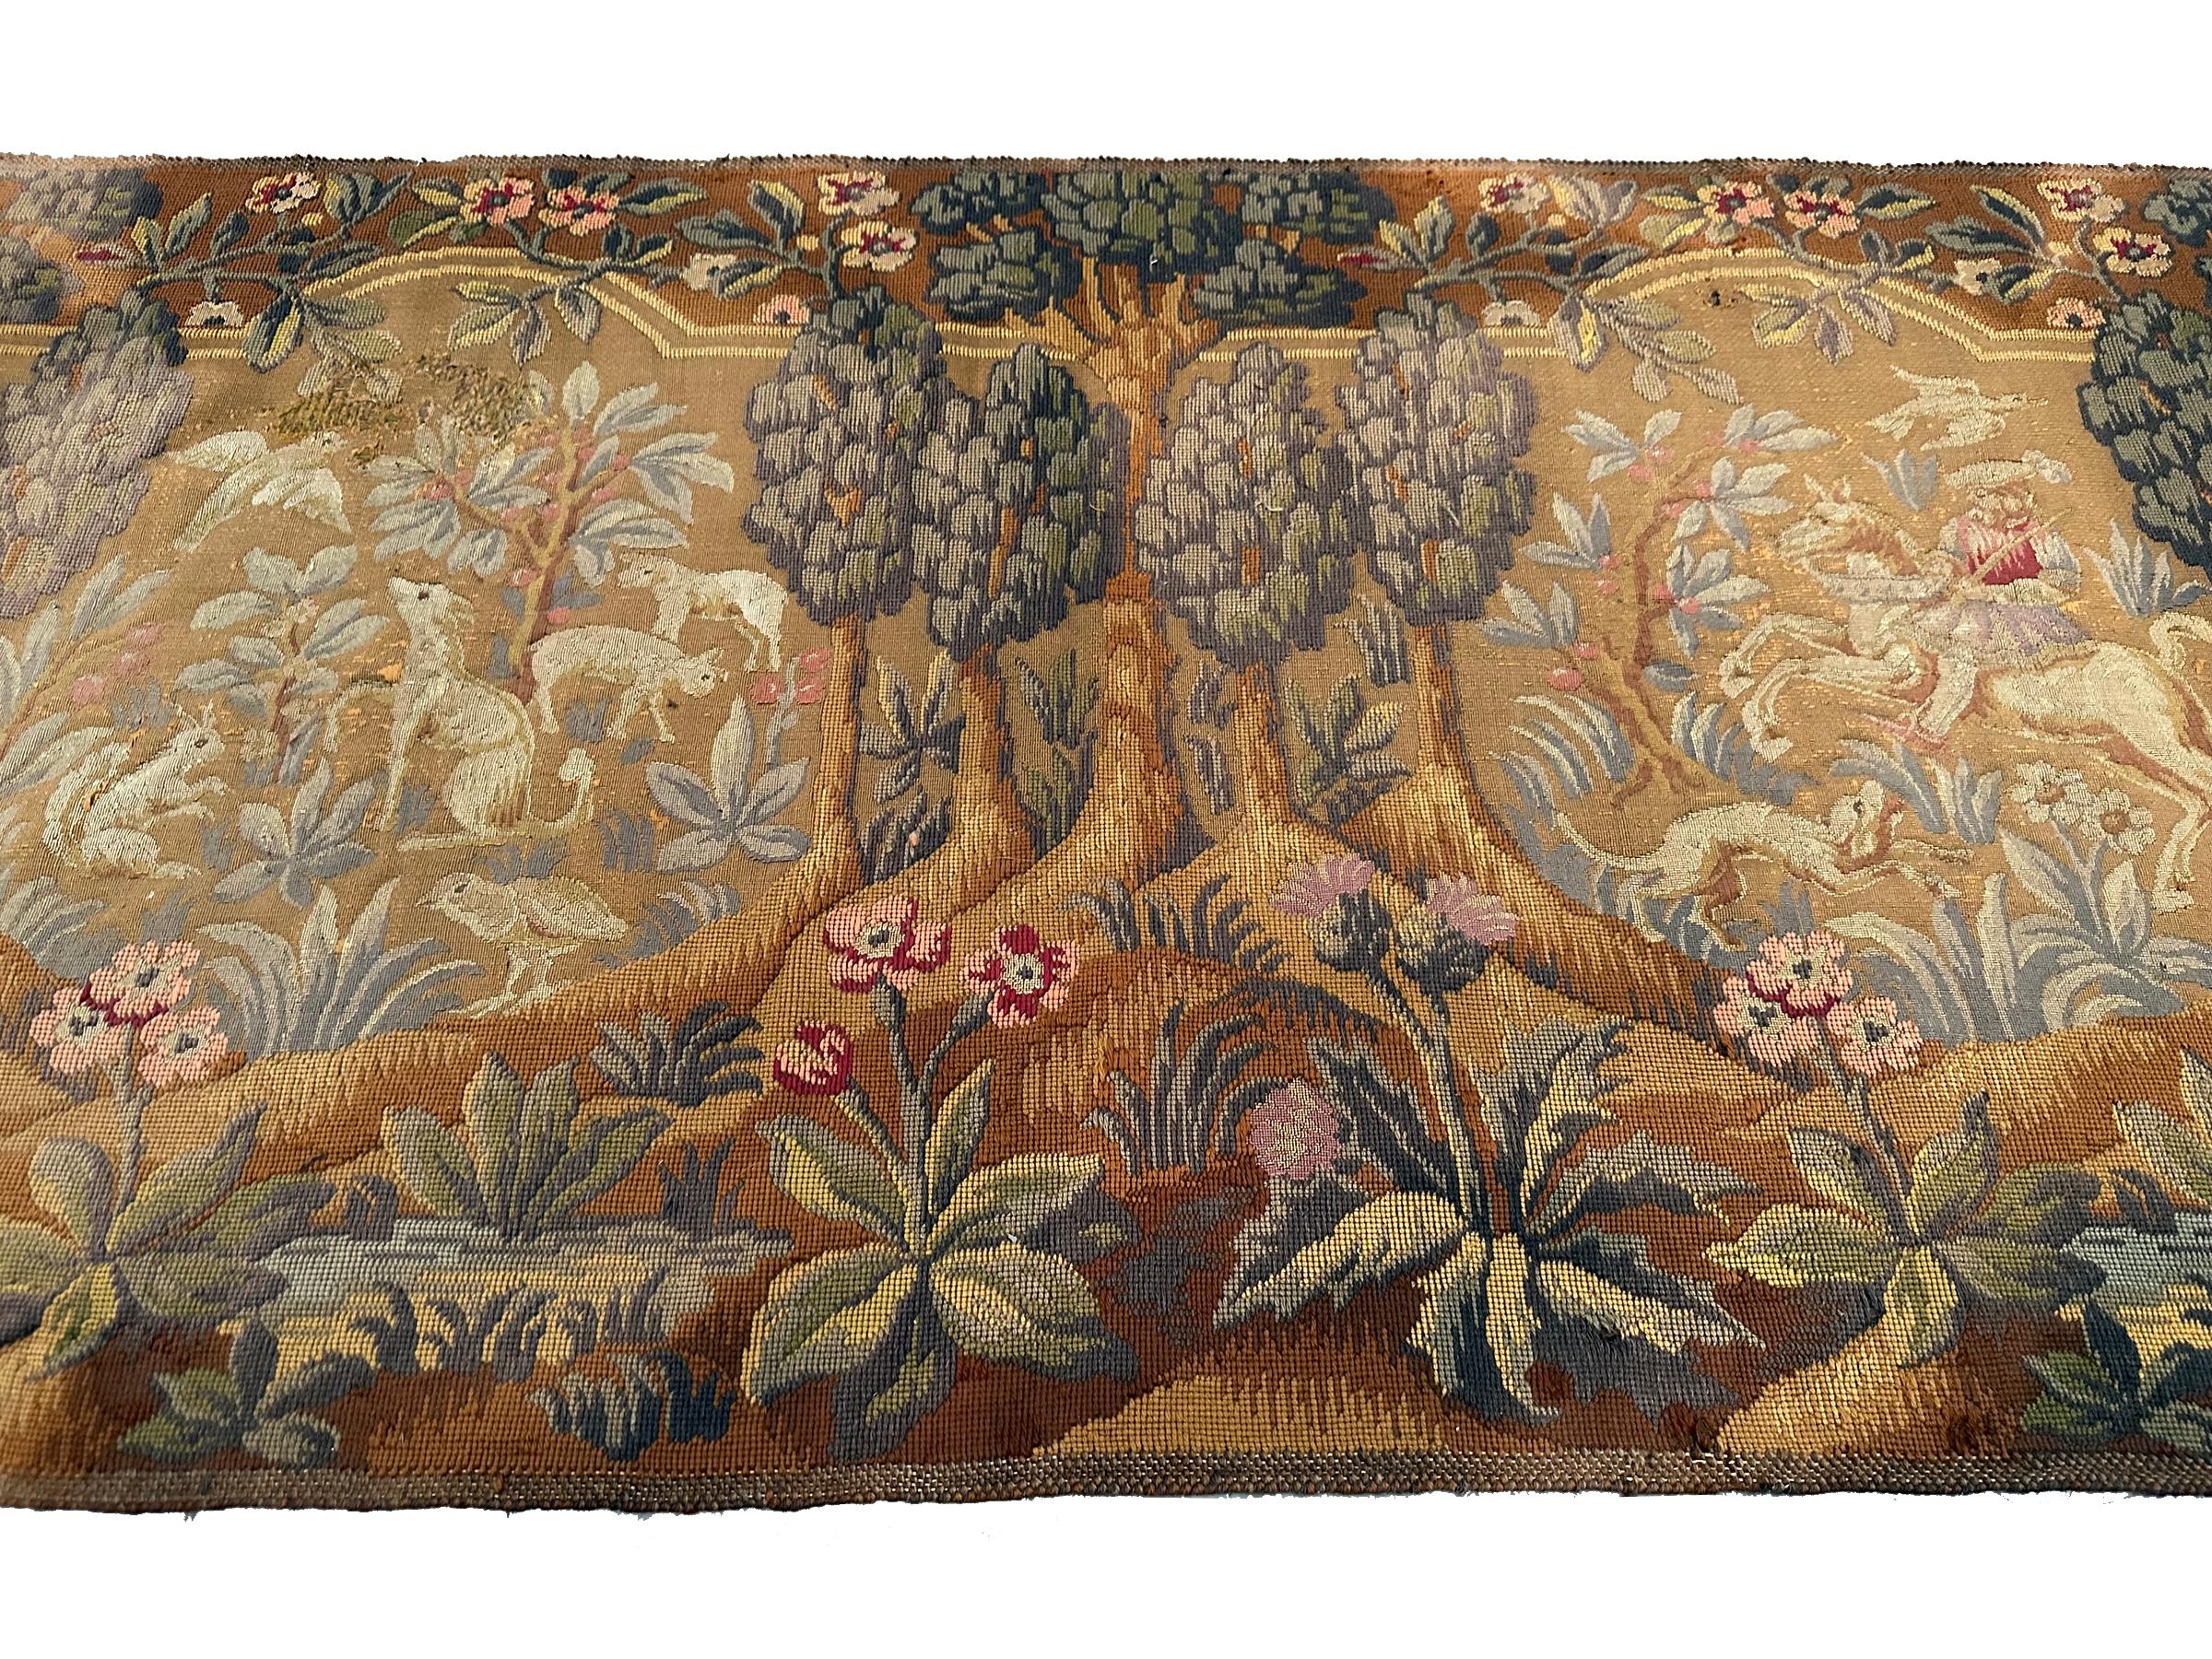 1920 Antique English Needlepoint Tapestry Wool & Silk 3x5 82cm x 158cm For Sale 6